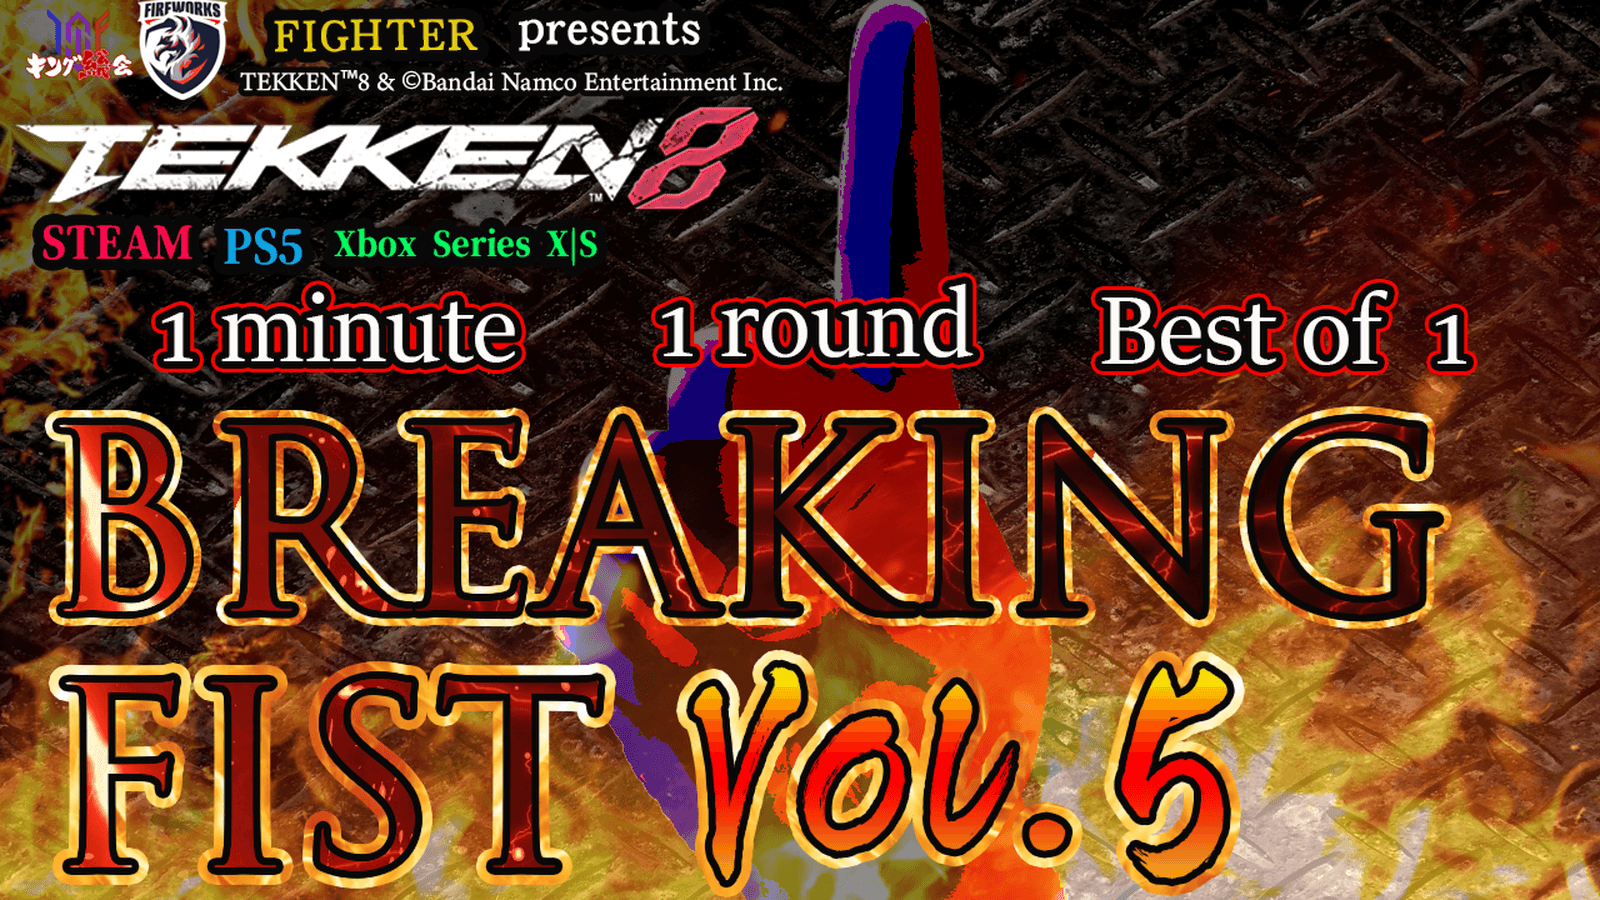 BREAKING FIST Vol.5 feature image